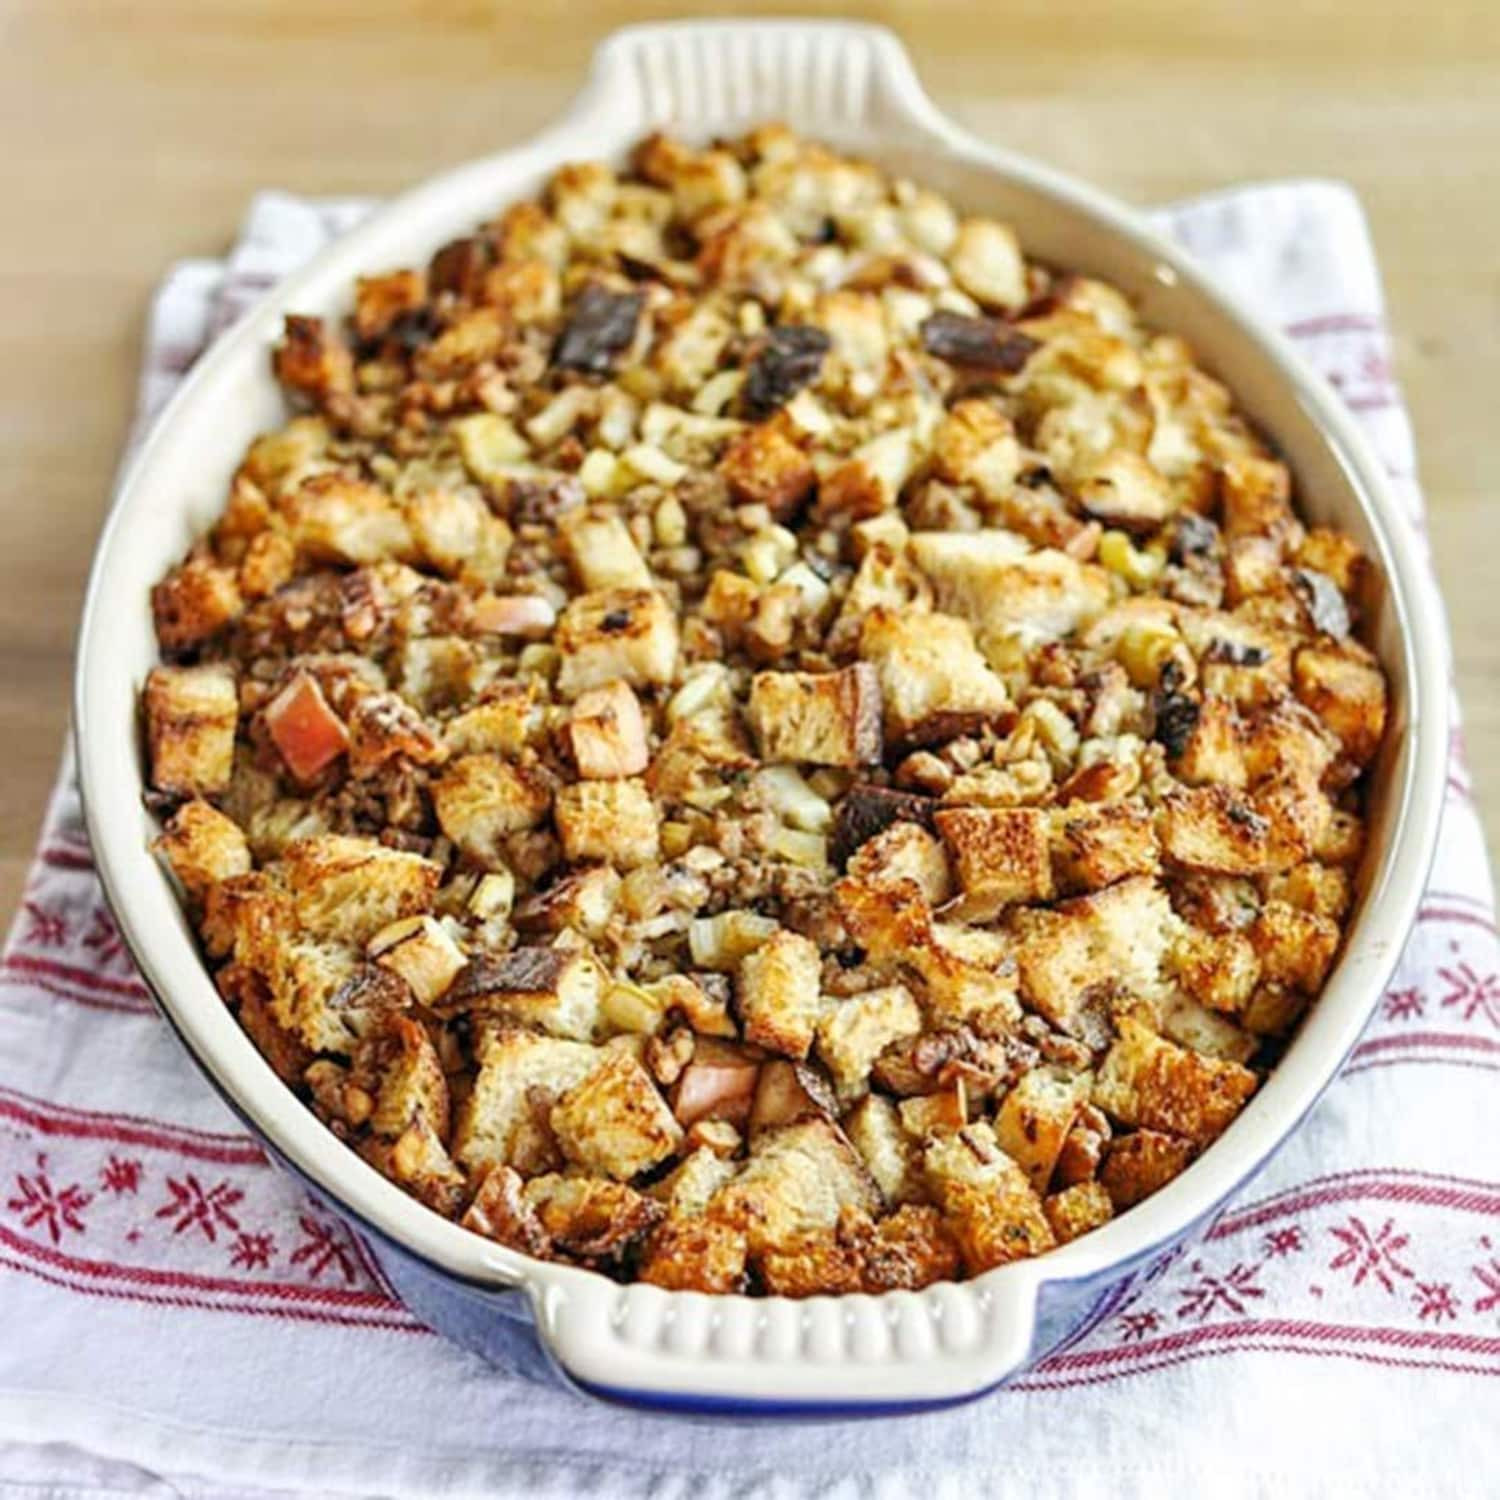 Bread Dressing For Thanksgiving
 How To Make Bread Stuffing Dressing for Thanksgiving